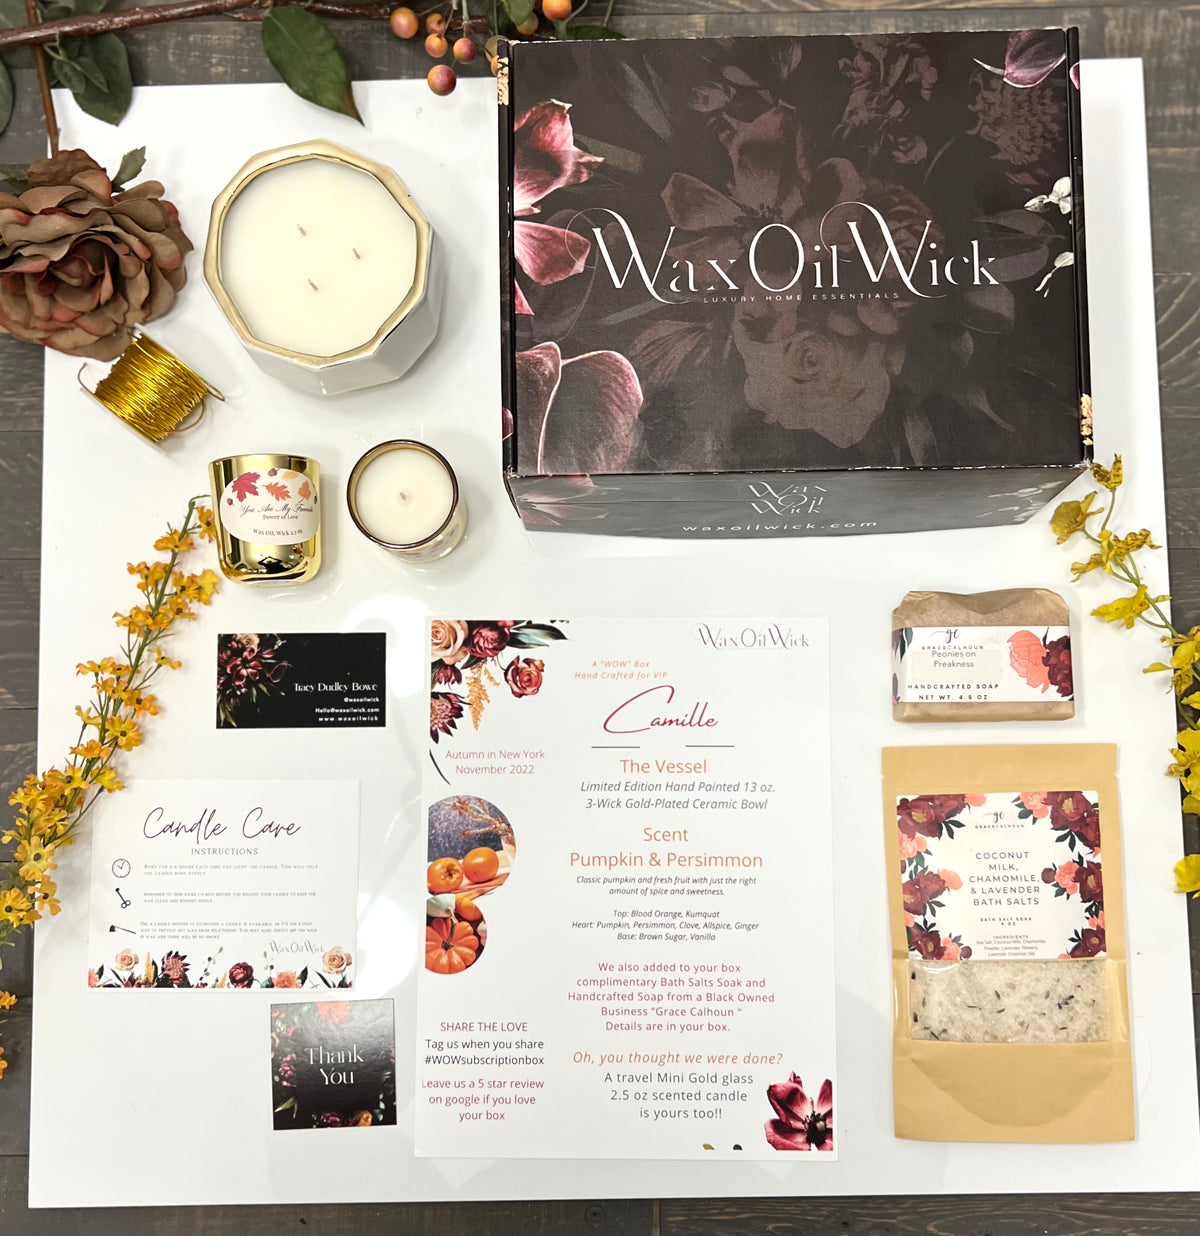 Monthly Subscription box filled with candles, perfumes, body care and other self care items